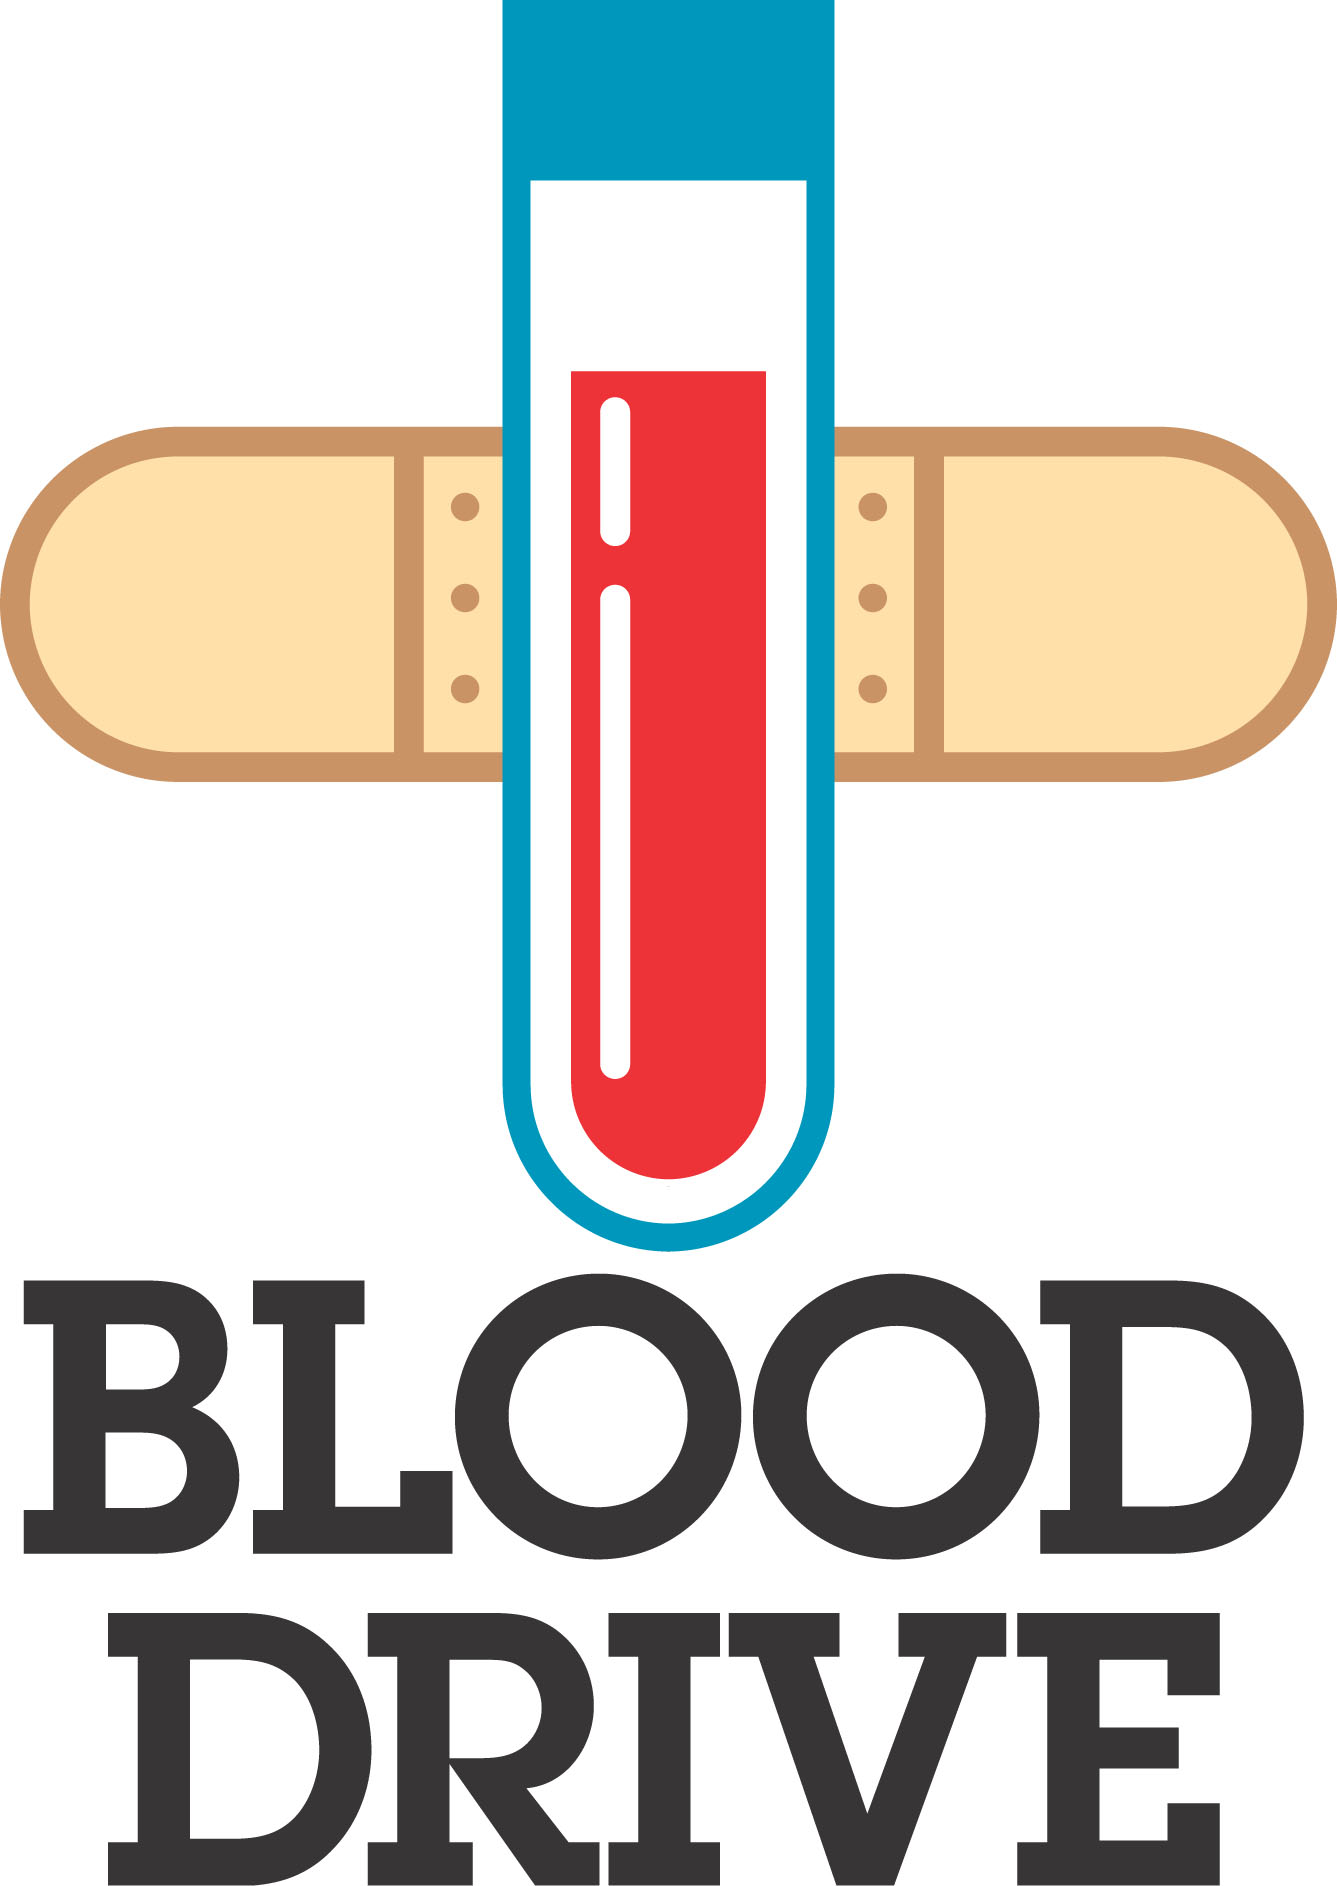 Blood Drive | Democratic Party of Washington County Wisconsin. Blood Drive Images - Clipart library